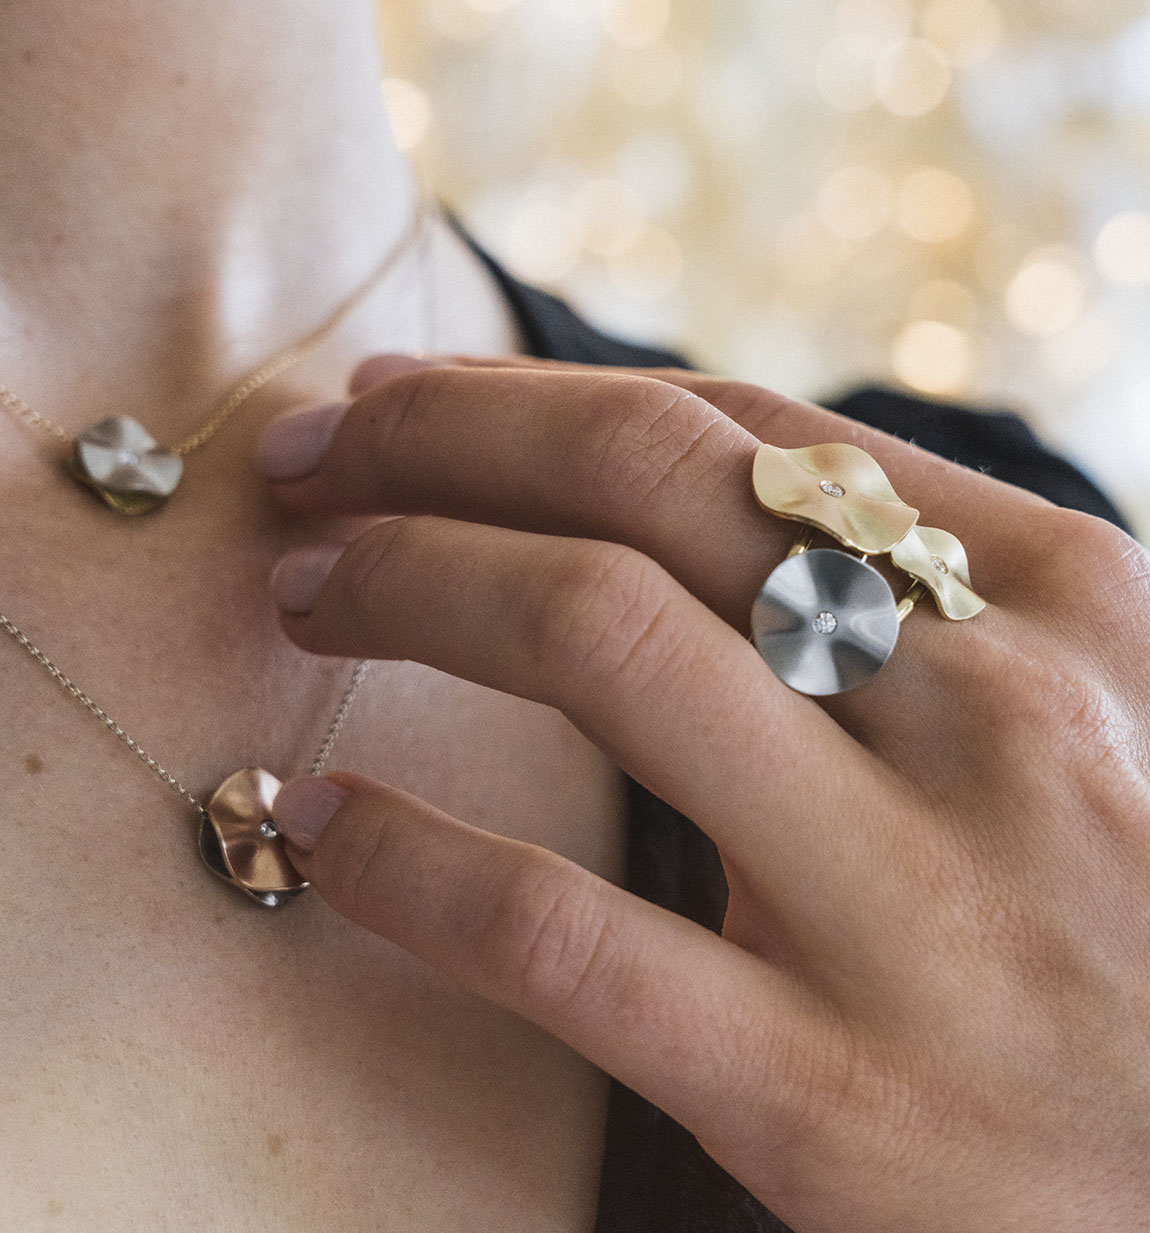 Annelie Fröhling: ATELIER JEWELLERY FROM A MASTER HAND